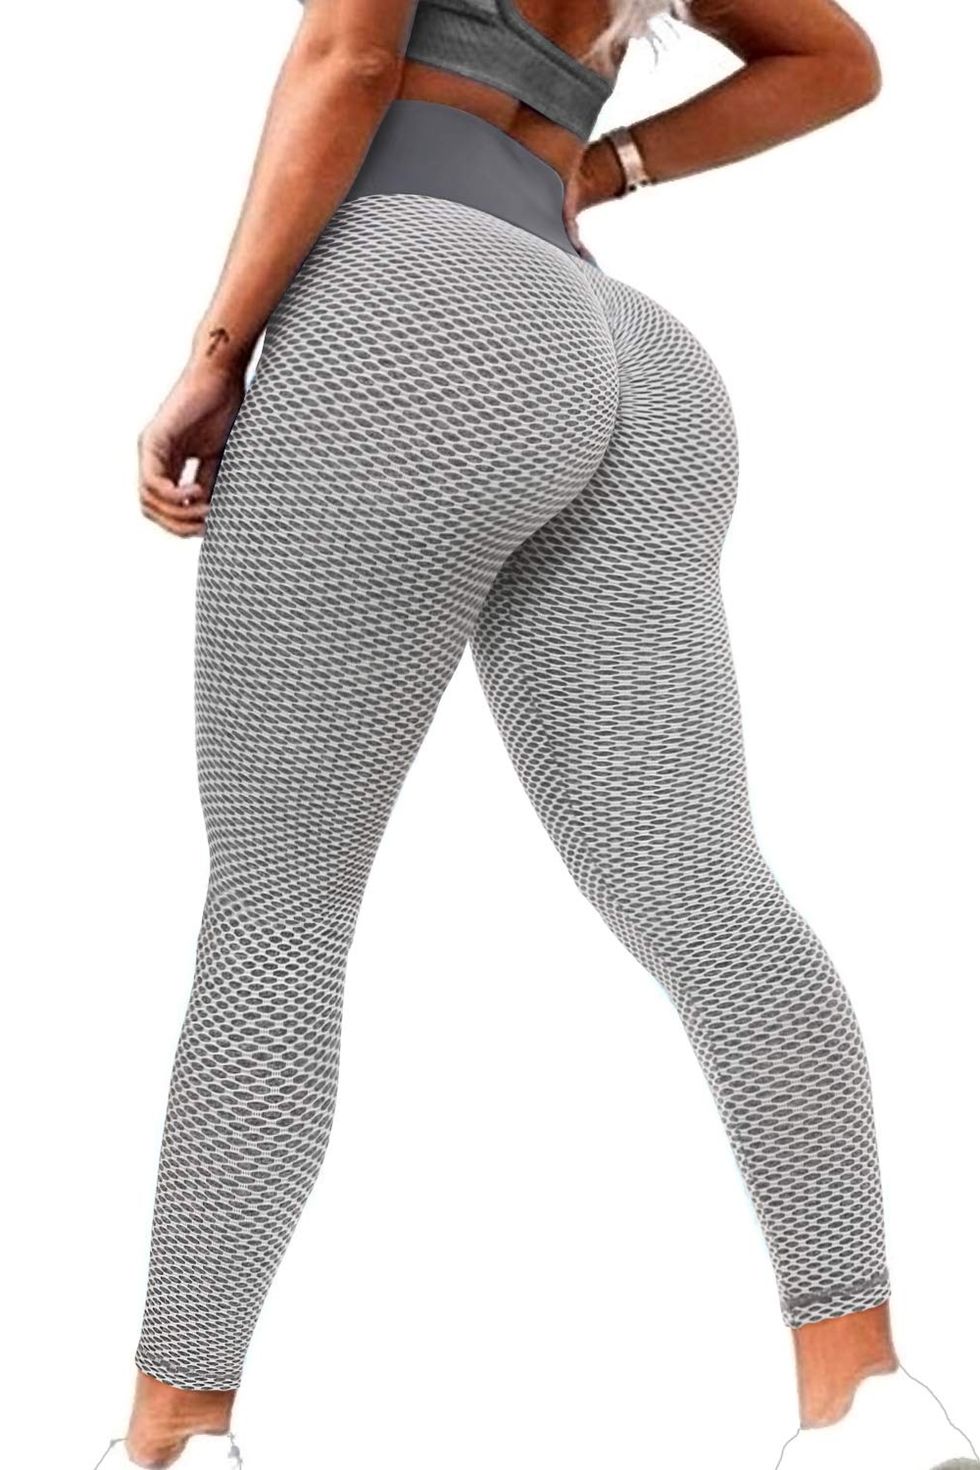 A AGROSTE Scrunch Butt Lifting Seamless Leggings Booty High Waisted Workout Yoga  Pants Anti-Cellulite Scrunch Pants Grey-S 